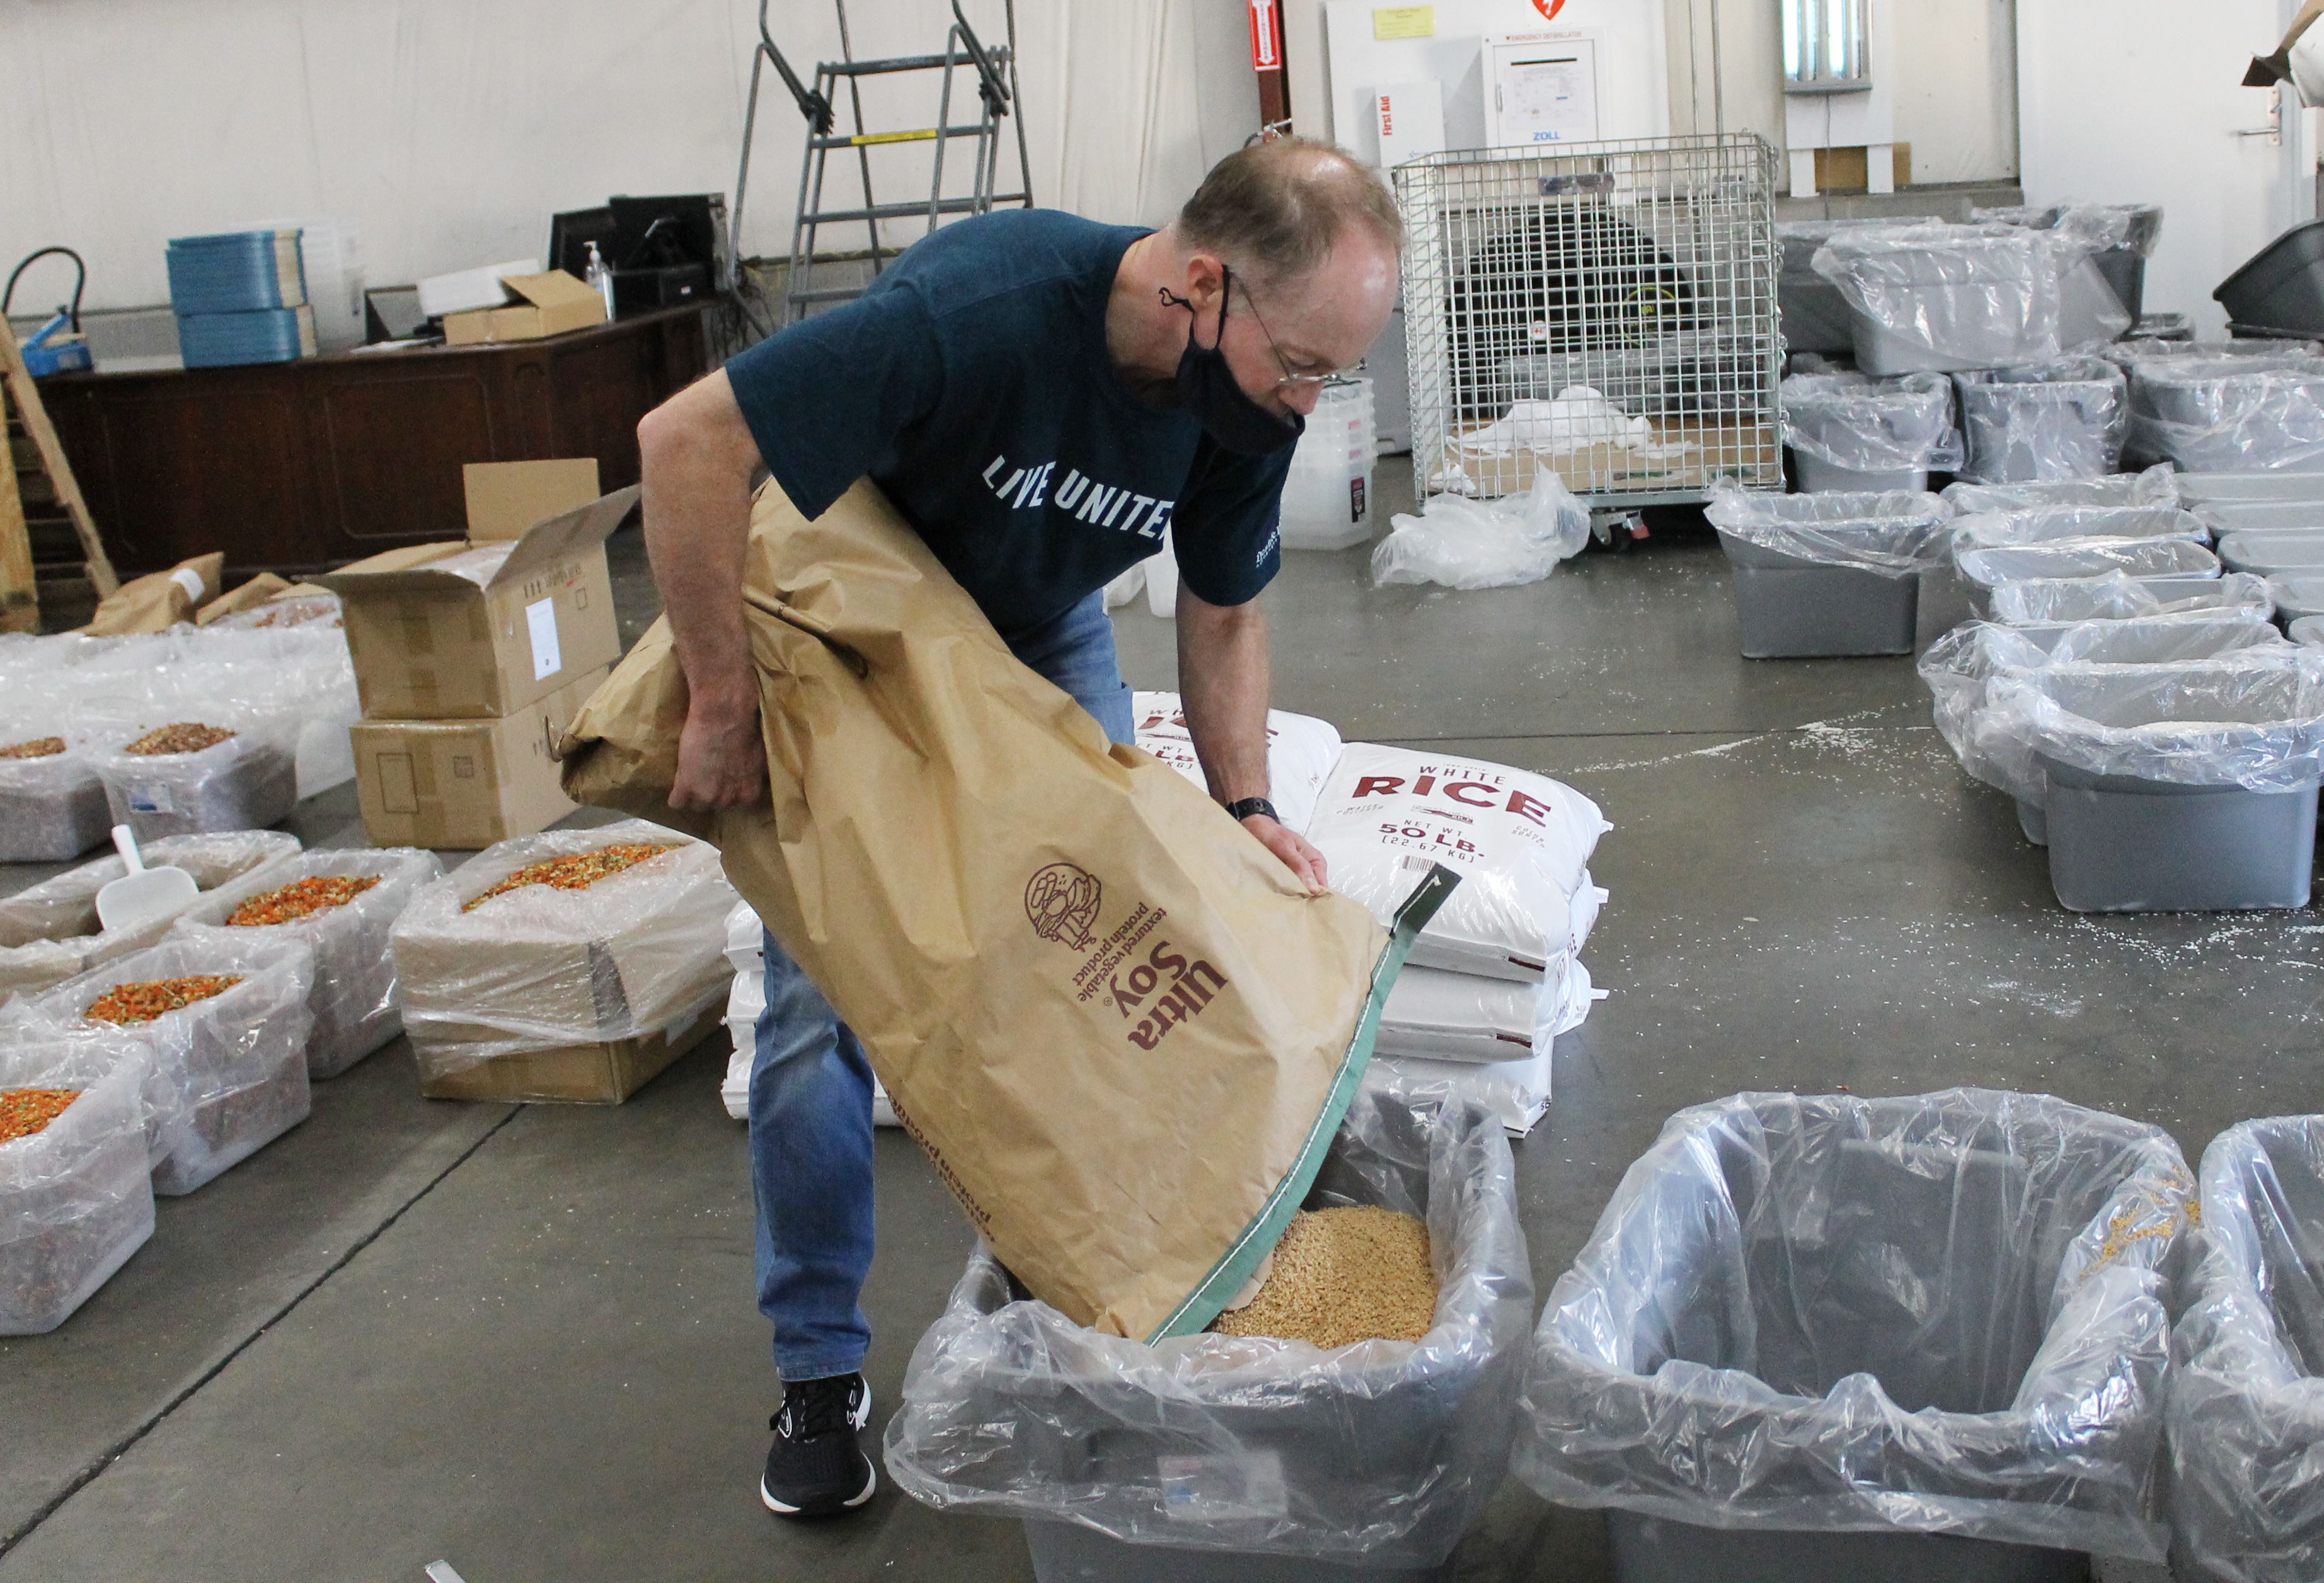 Volunteer emptying food into a container